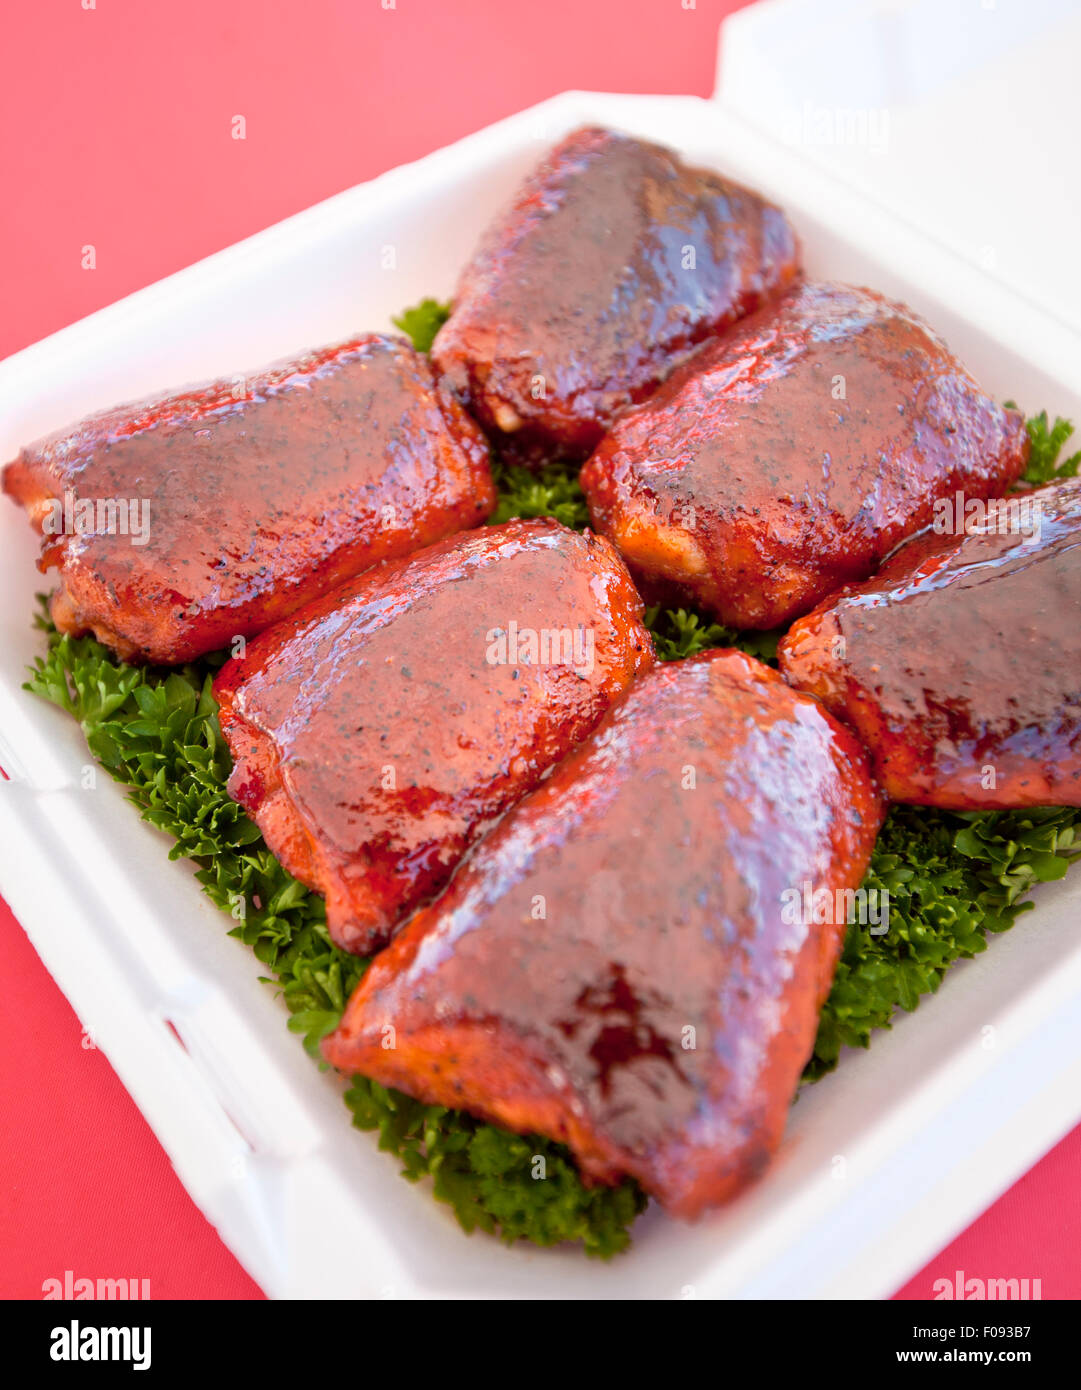 BBQ chicken thighs on a bed of parsley Stock Photo